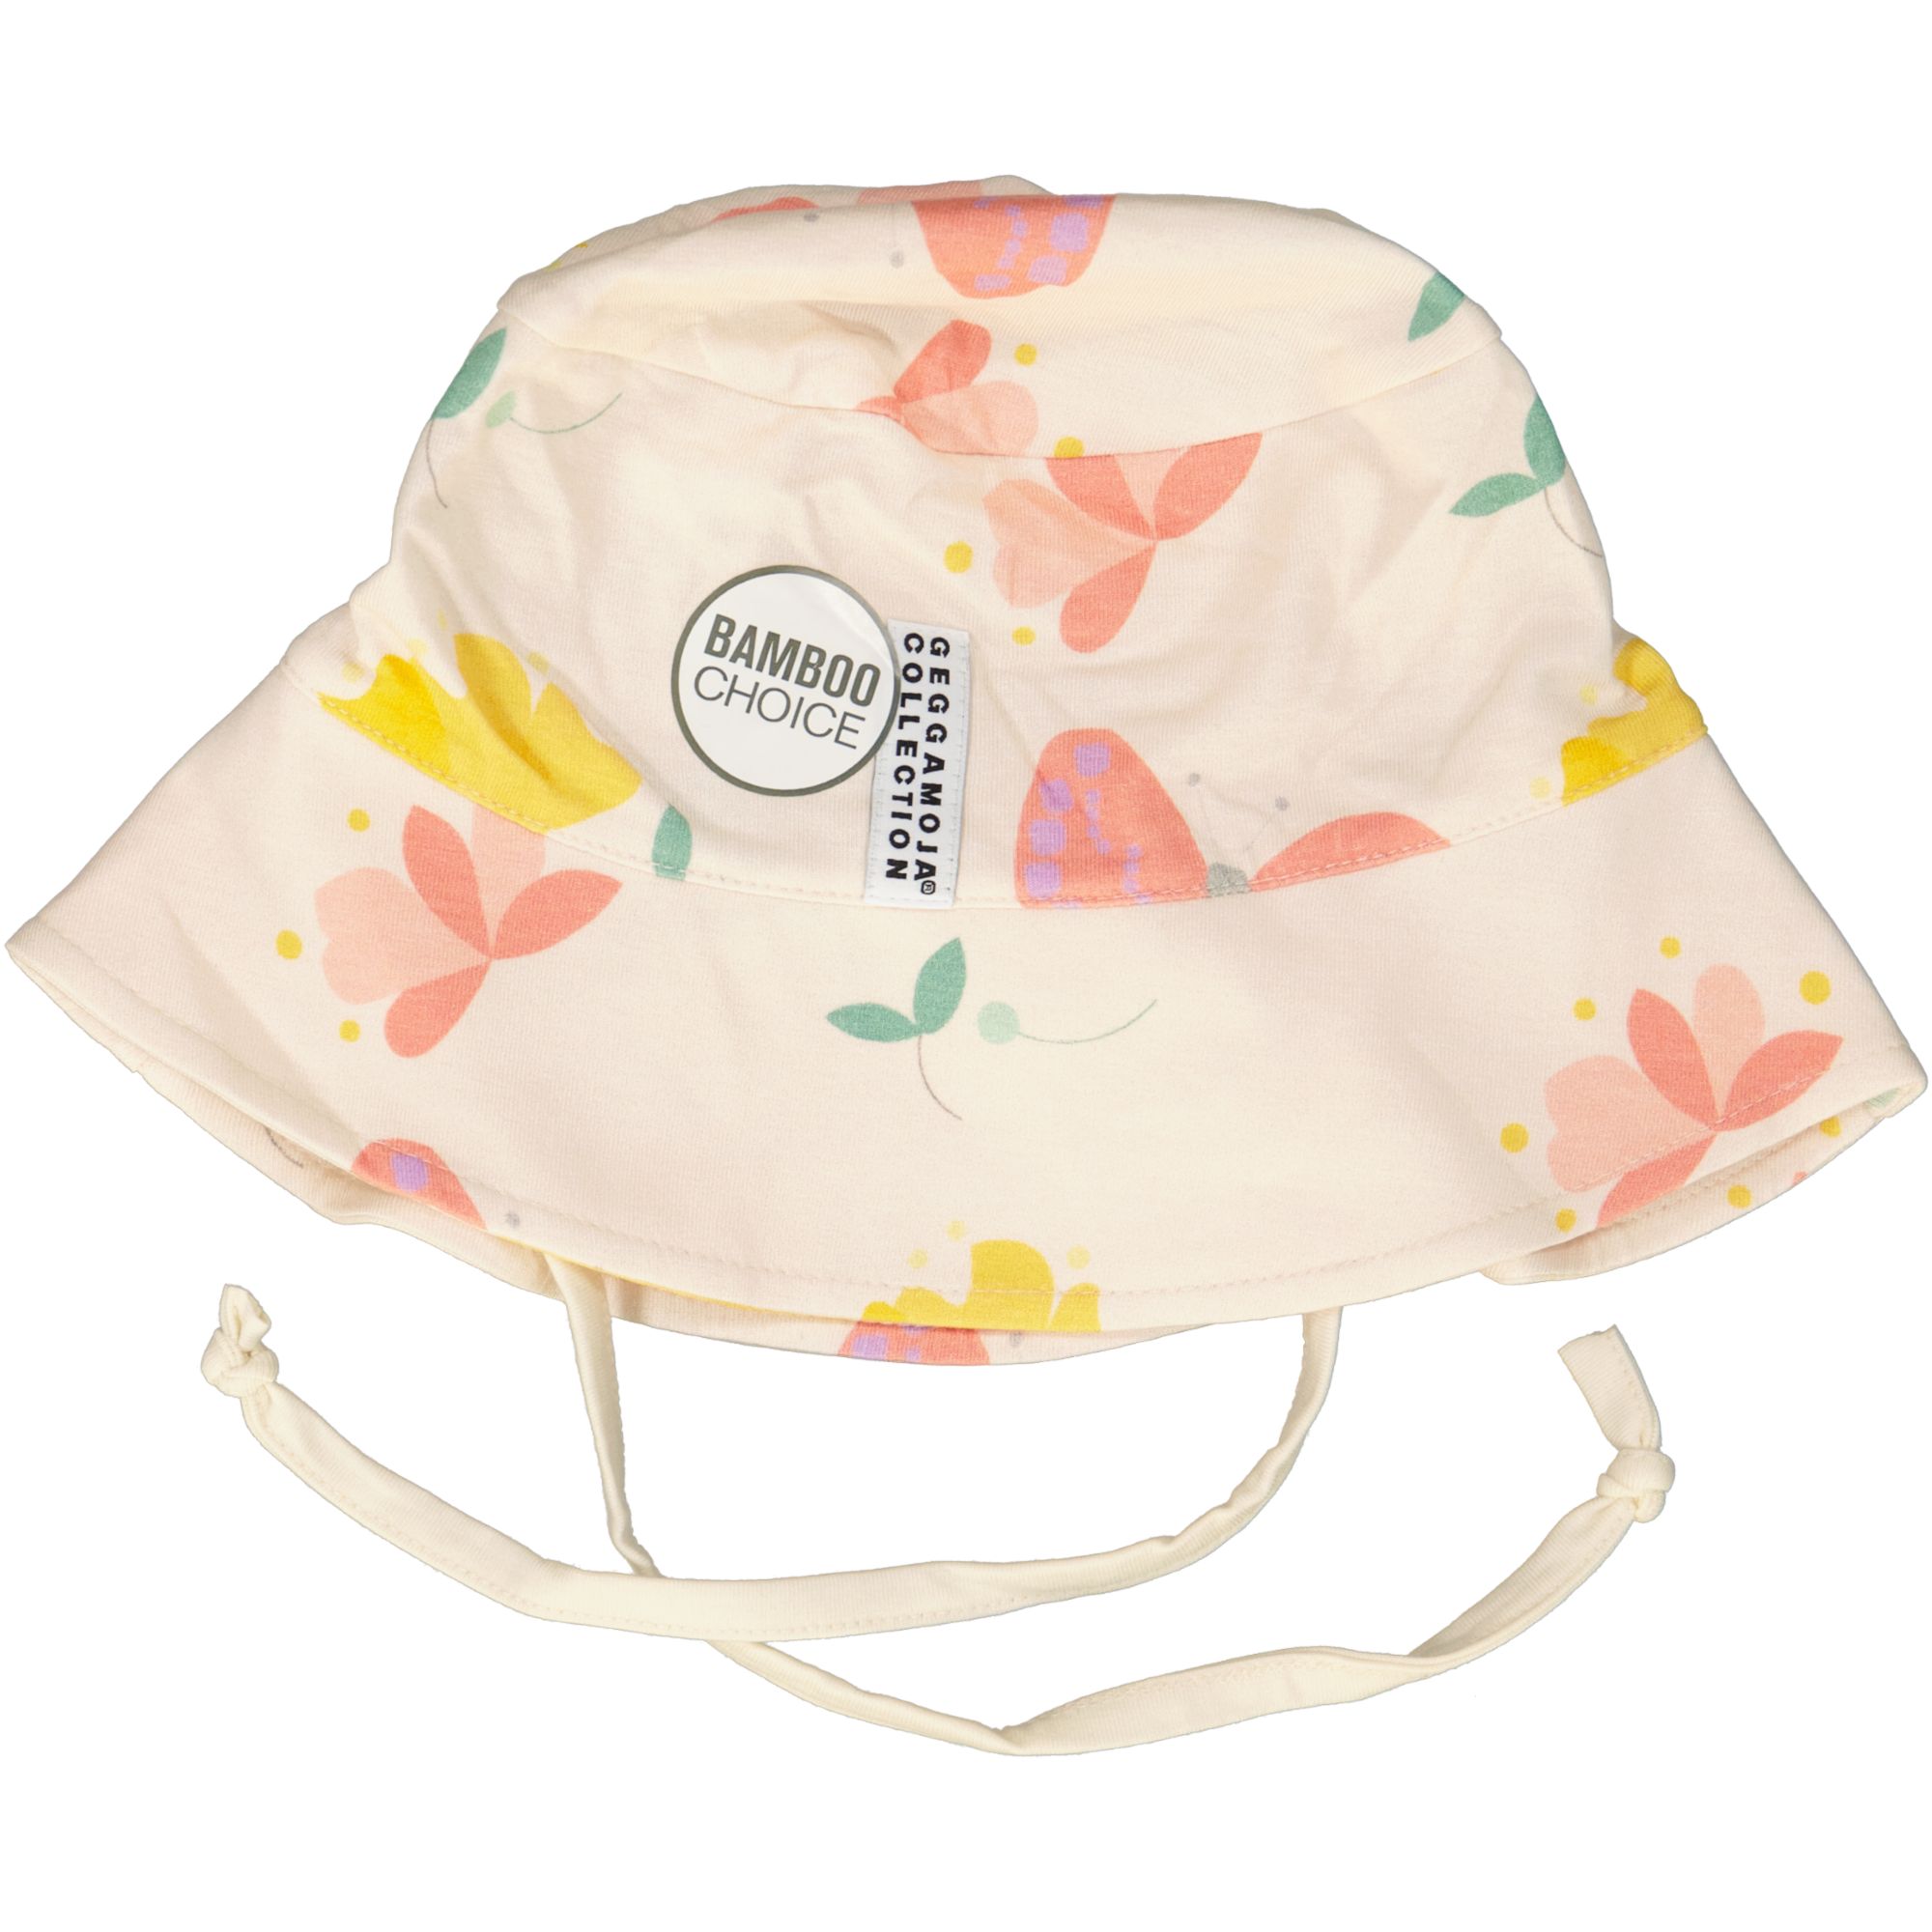 Bamboo Sunny hat Butterfly